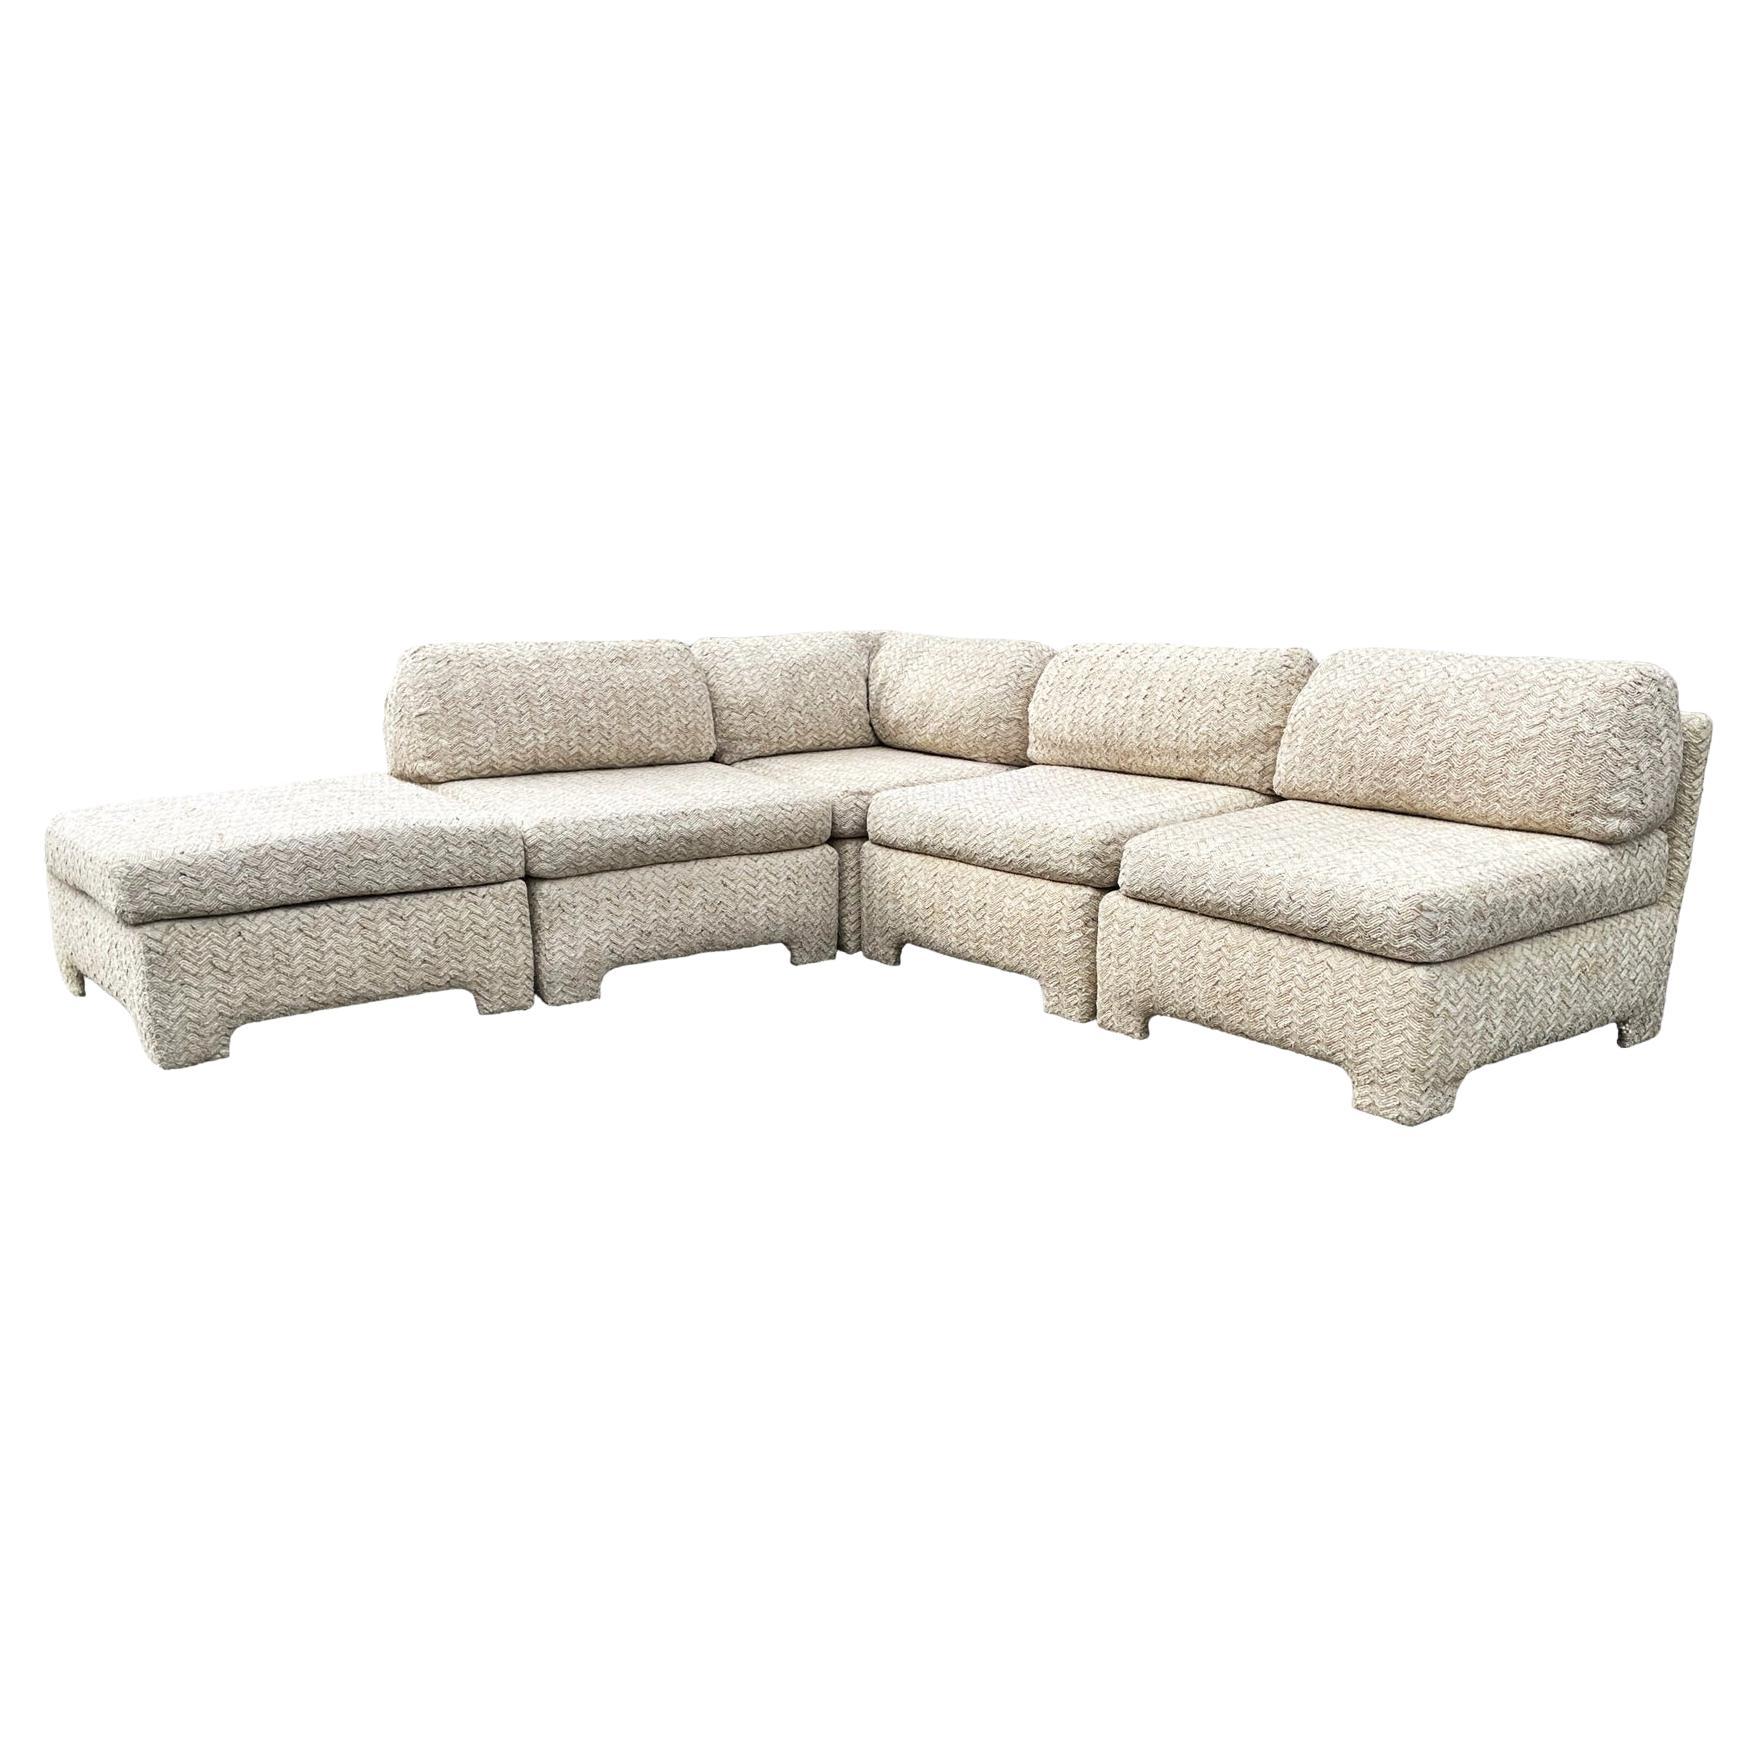 Mid Century Modern Boxy Modular Parsons Style L Shaped Sofa with Chaise Lounge For Sale